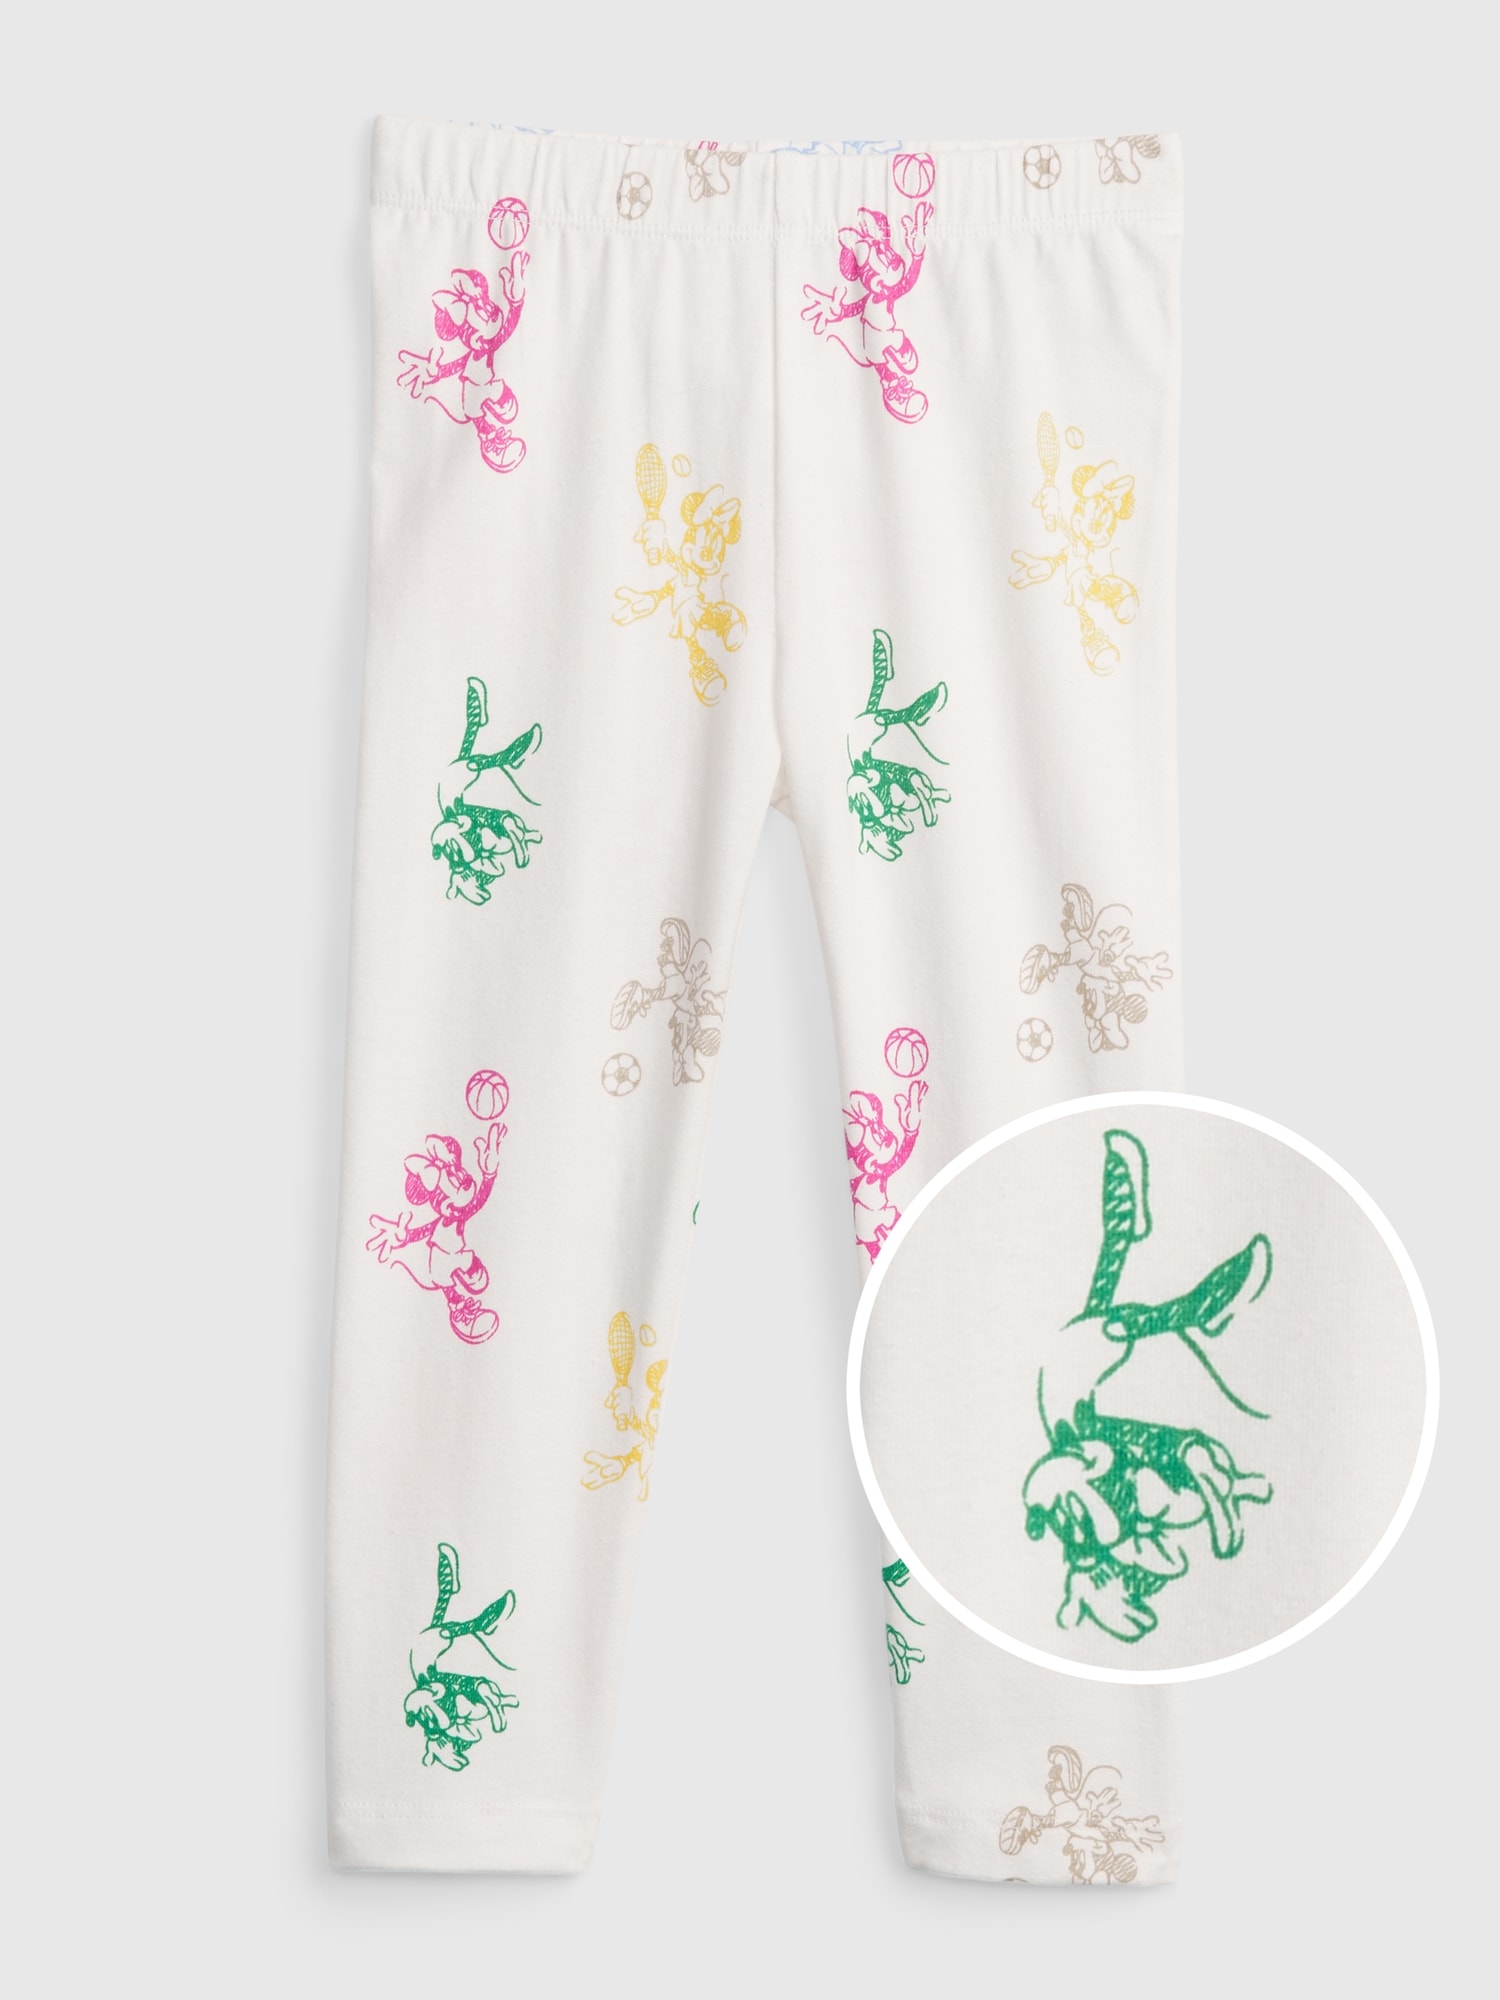 Girls' Leggings - Many Faces of Minnie Mouse